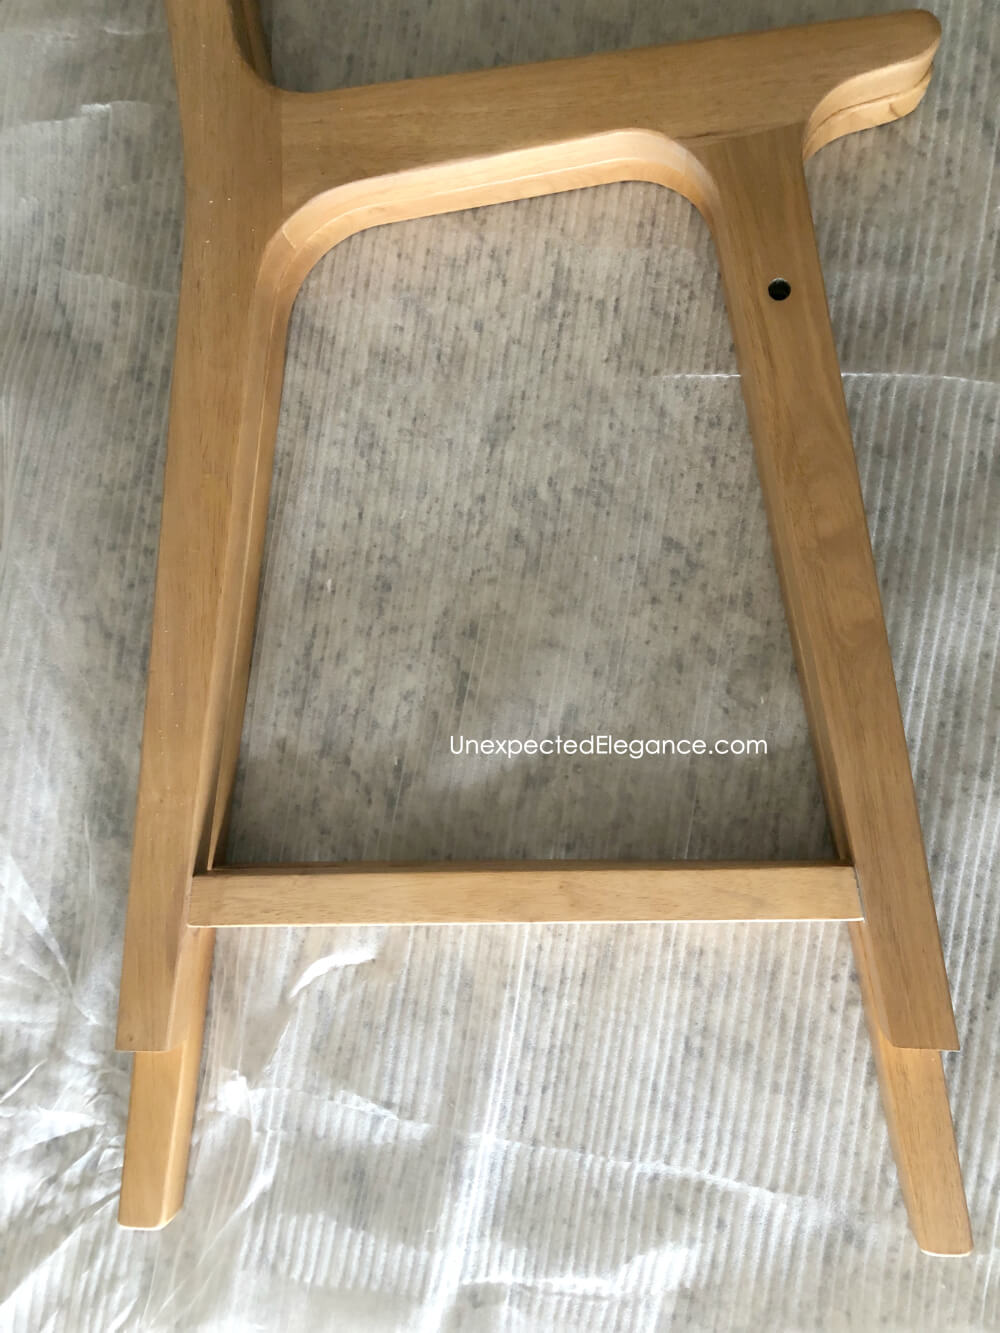 How To Cut A Barstool Counter Height, Best Way To Cut Down Bar Stool Legs